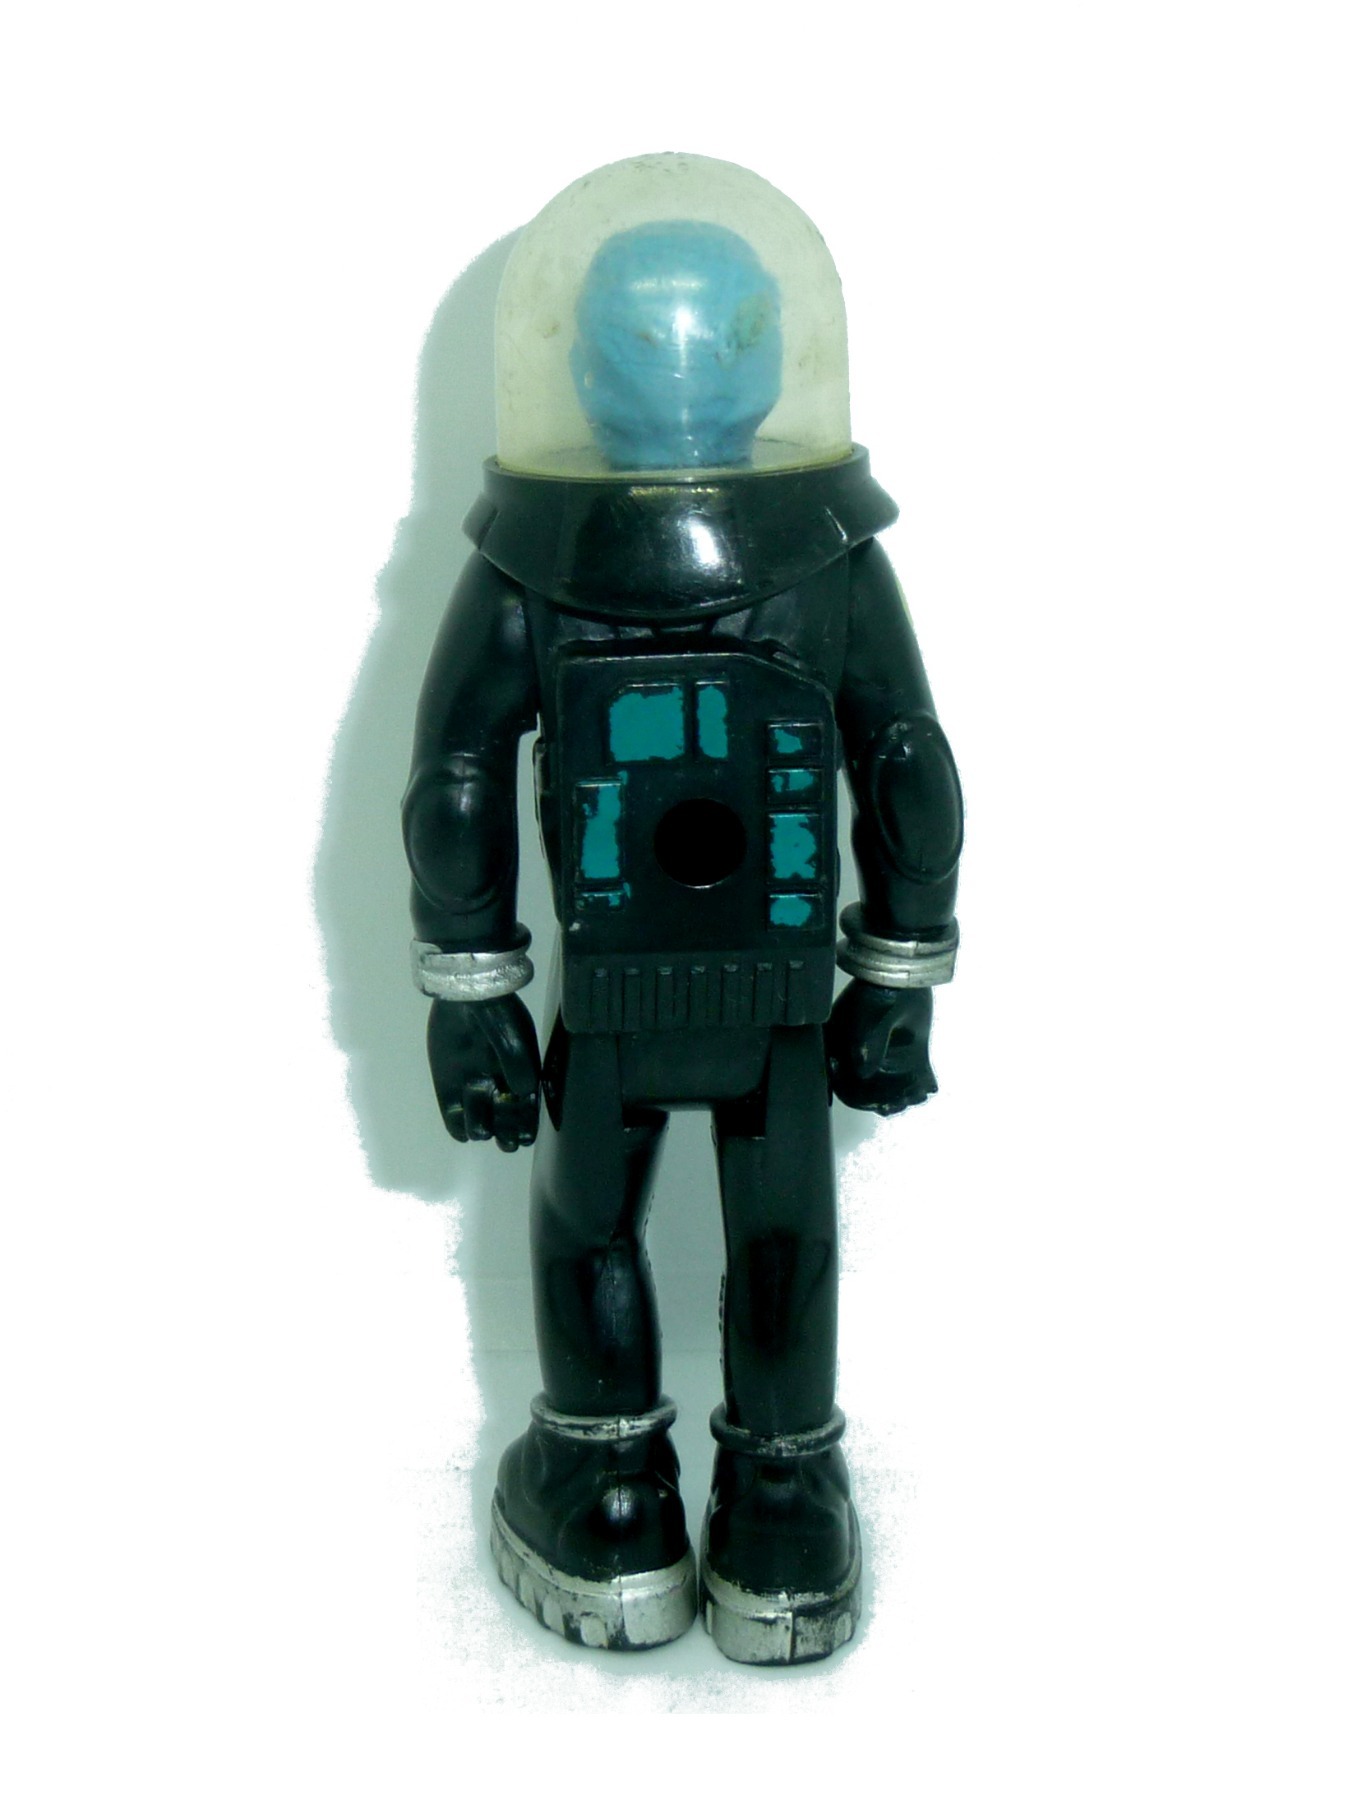 Astronaut / Space Figur 1979 Fisher Price Toys 3